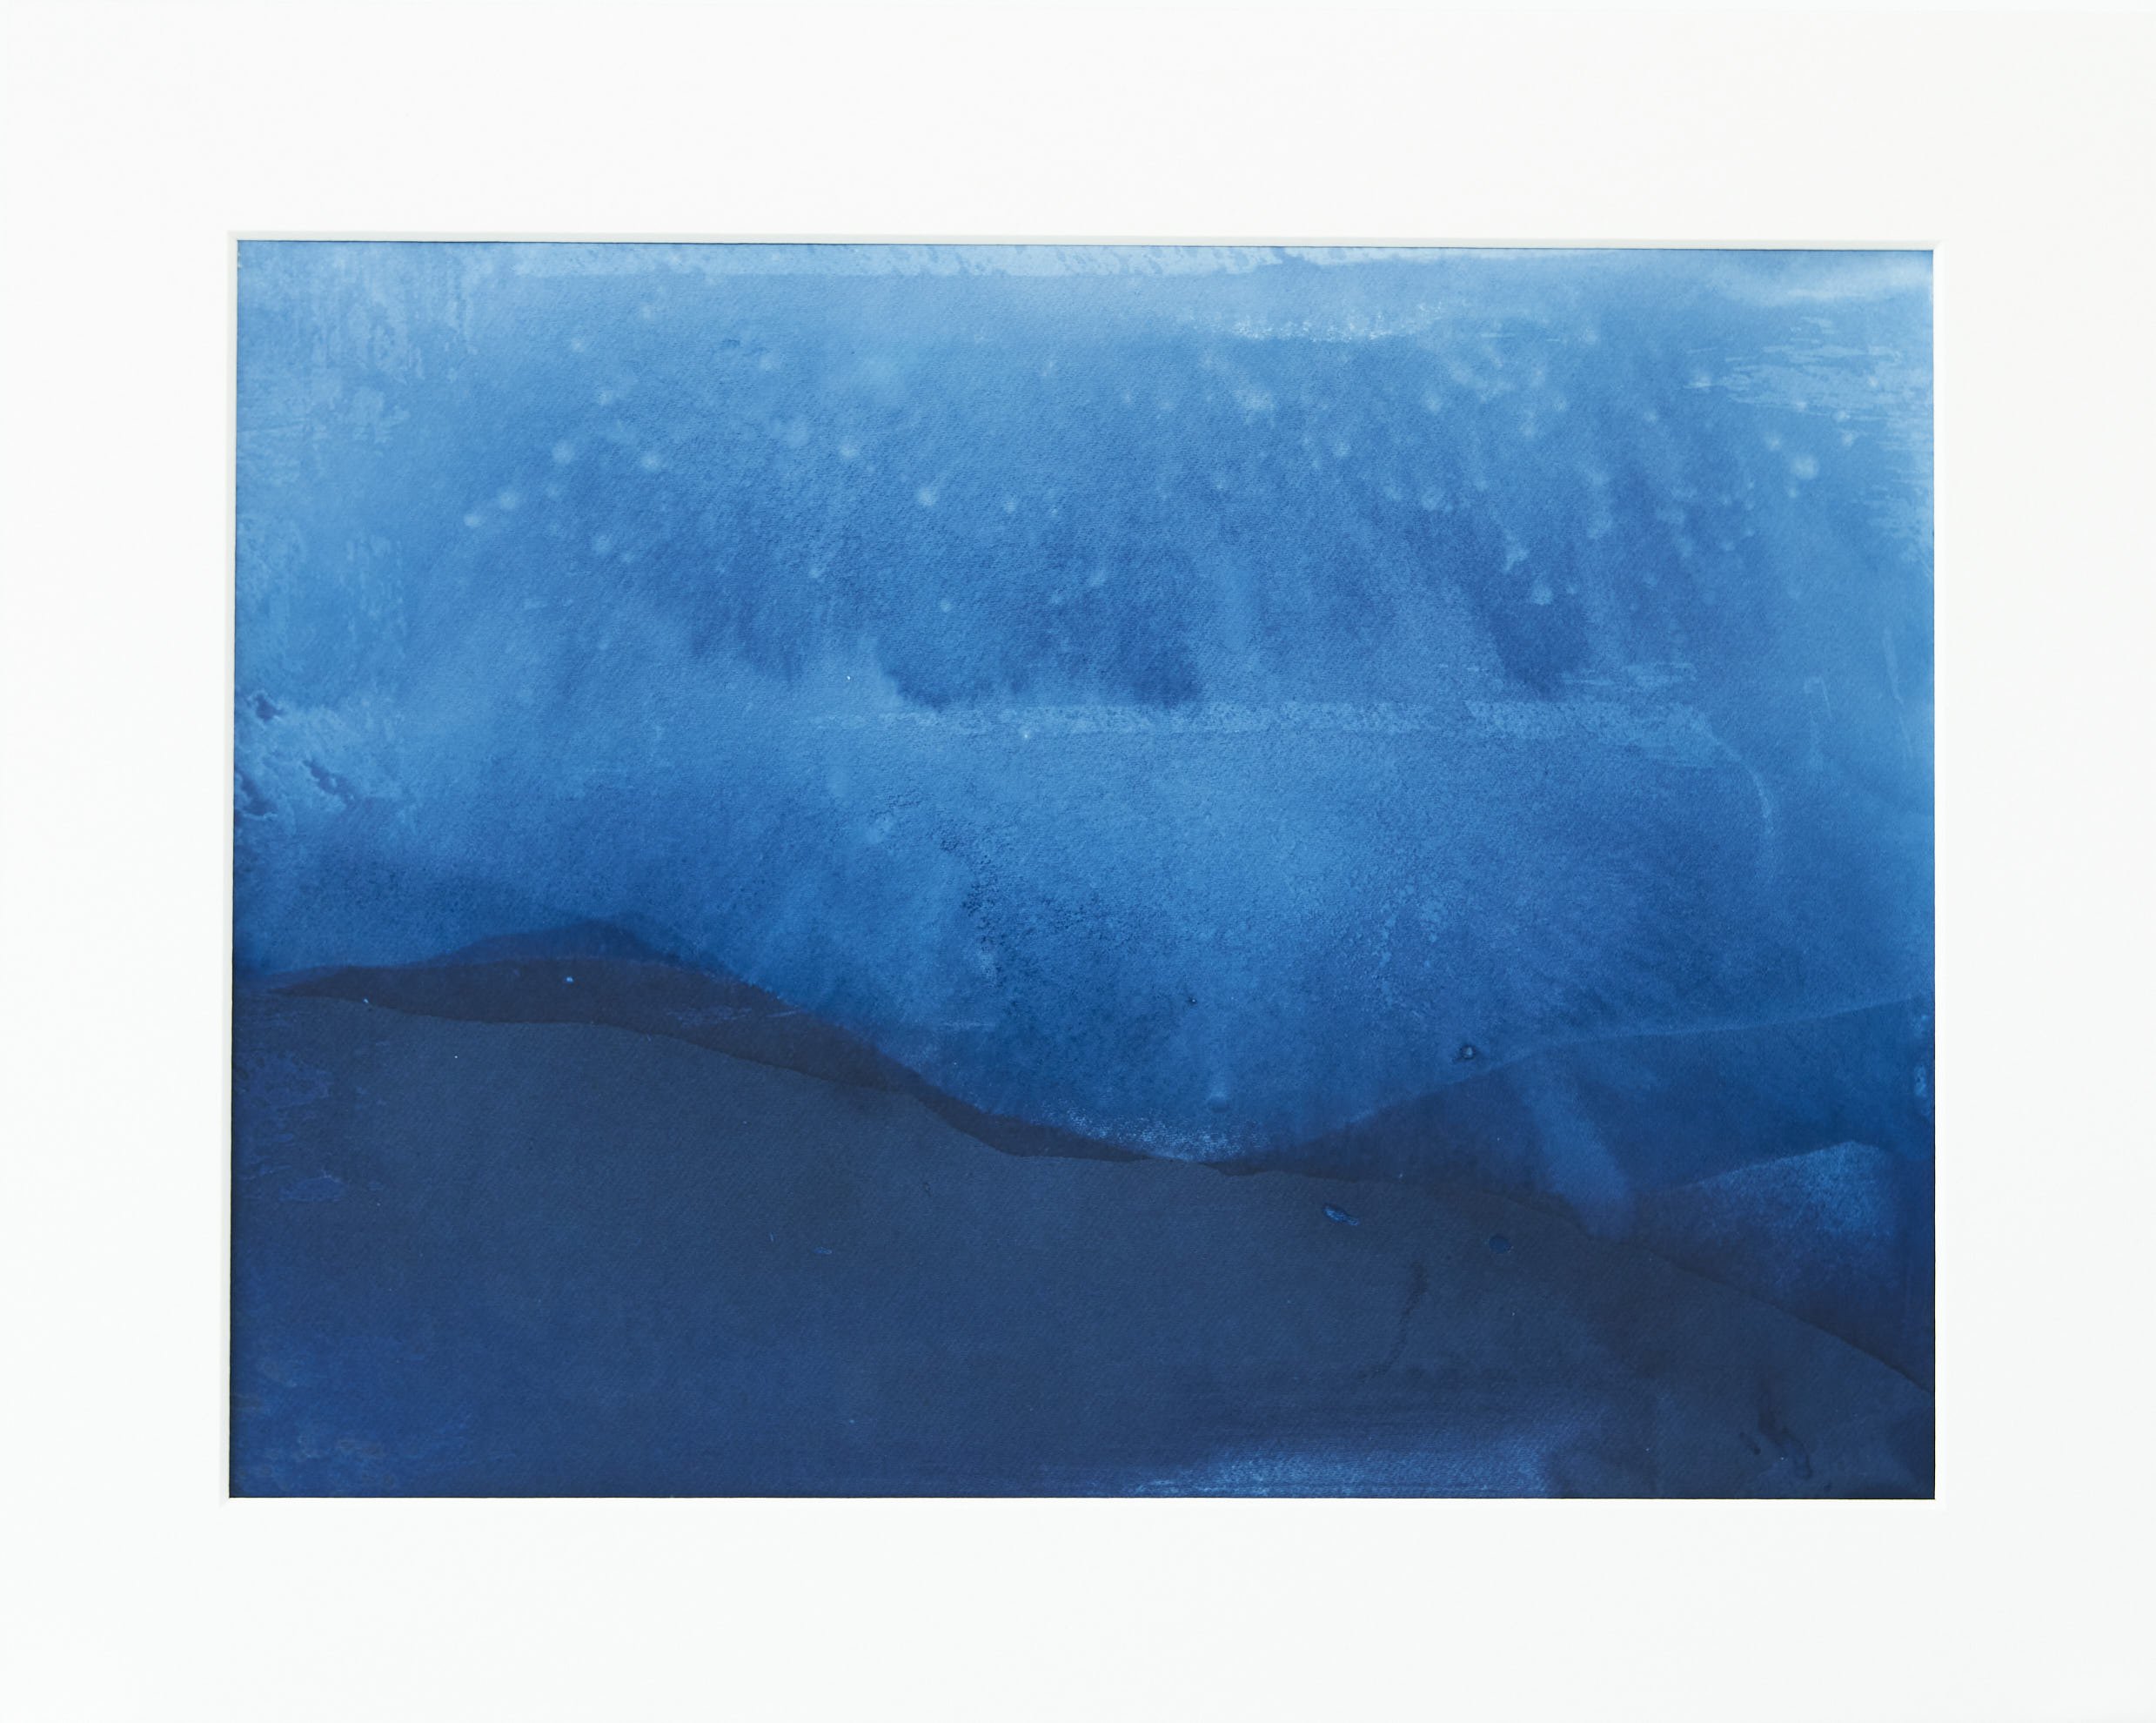  IL-Halford-2021-015 Cyanotype on paper  Print 9x12in  